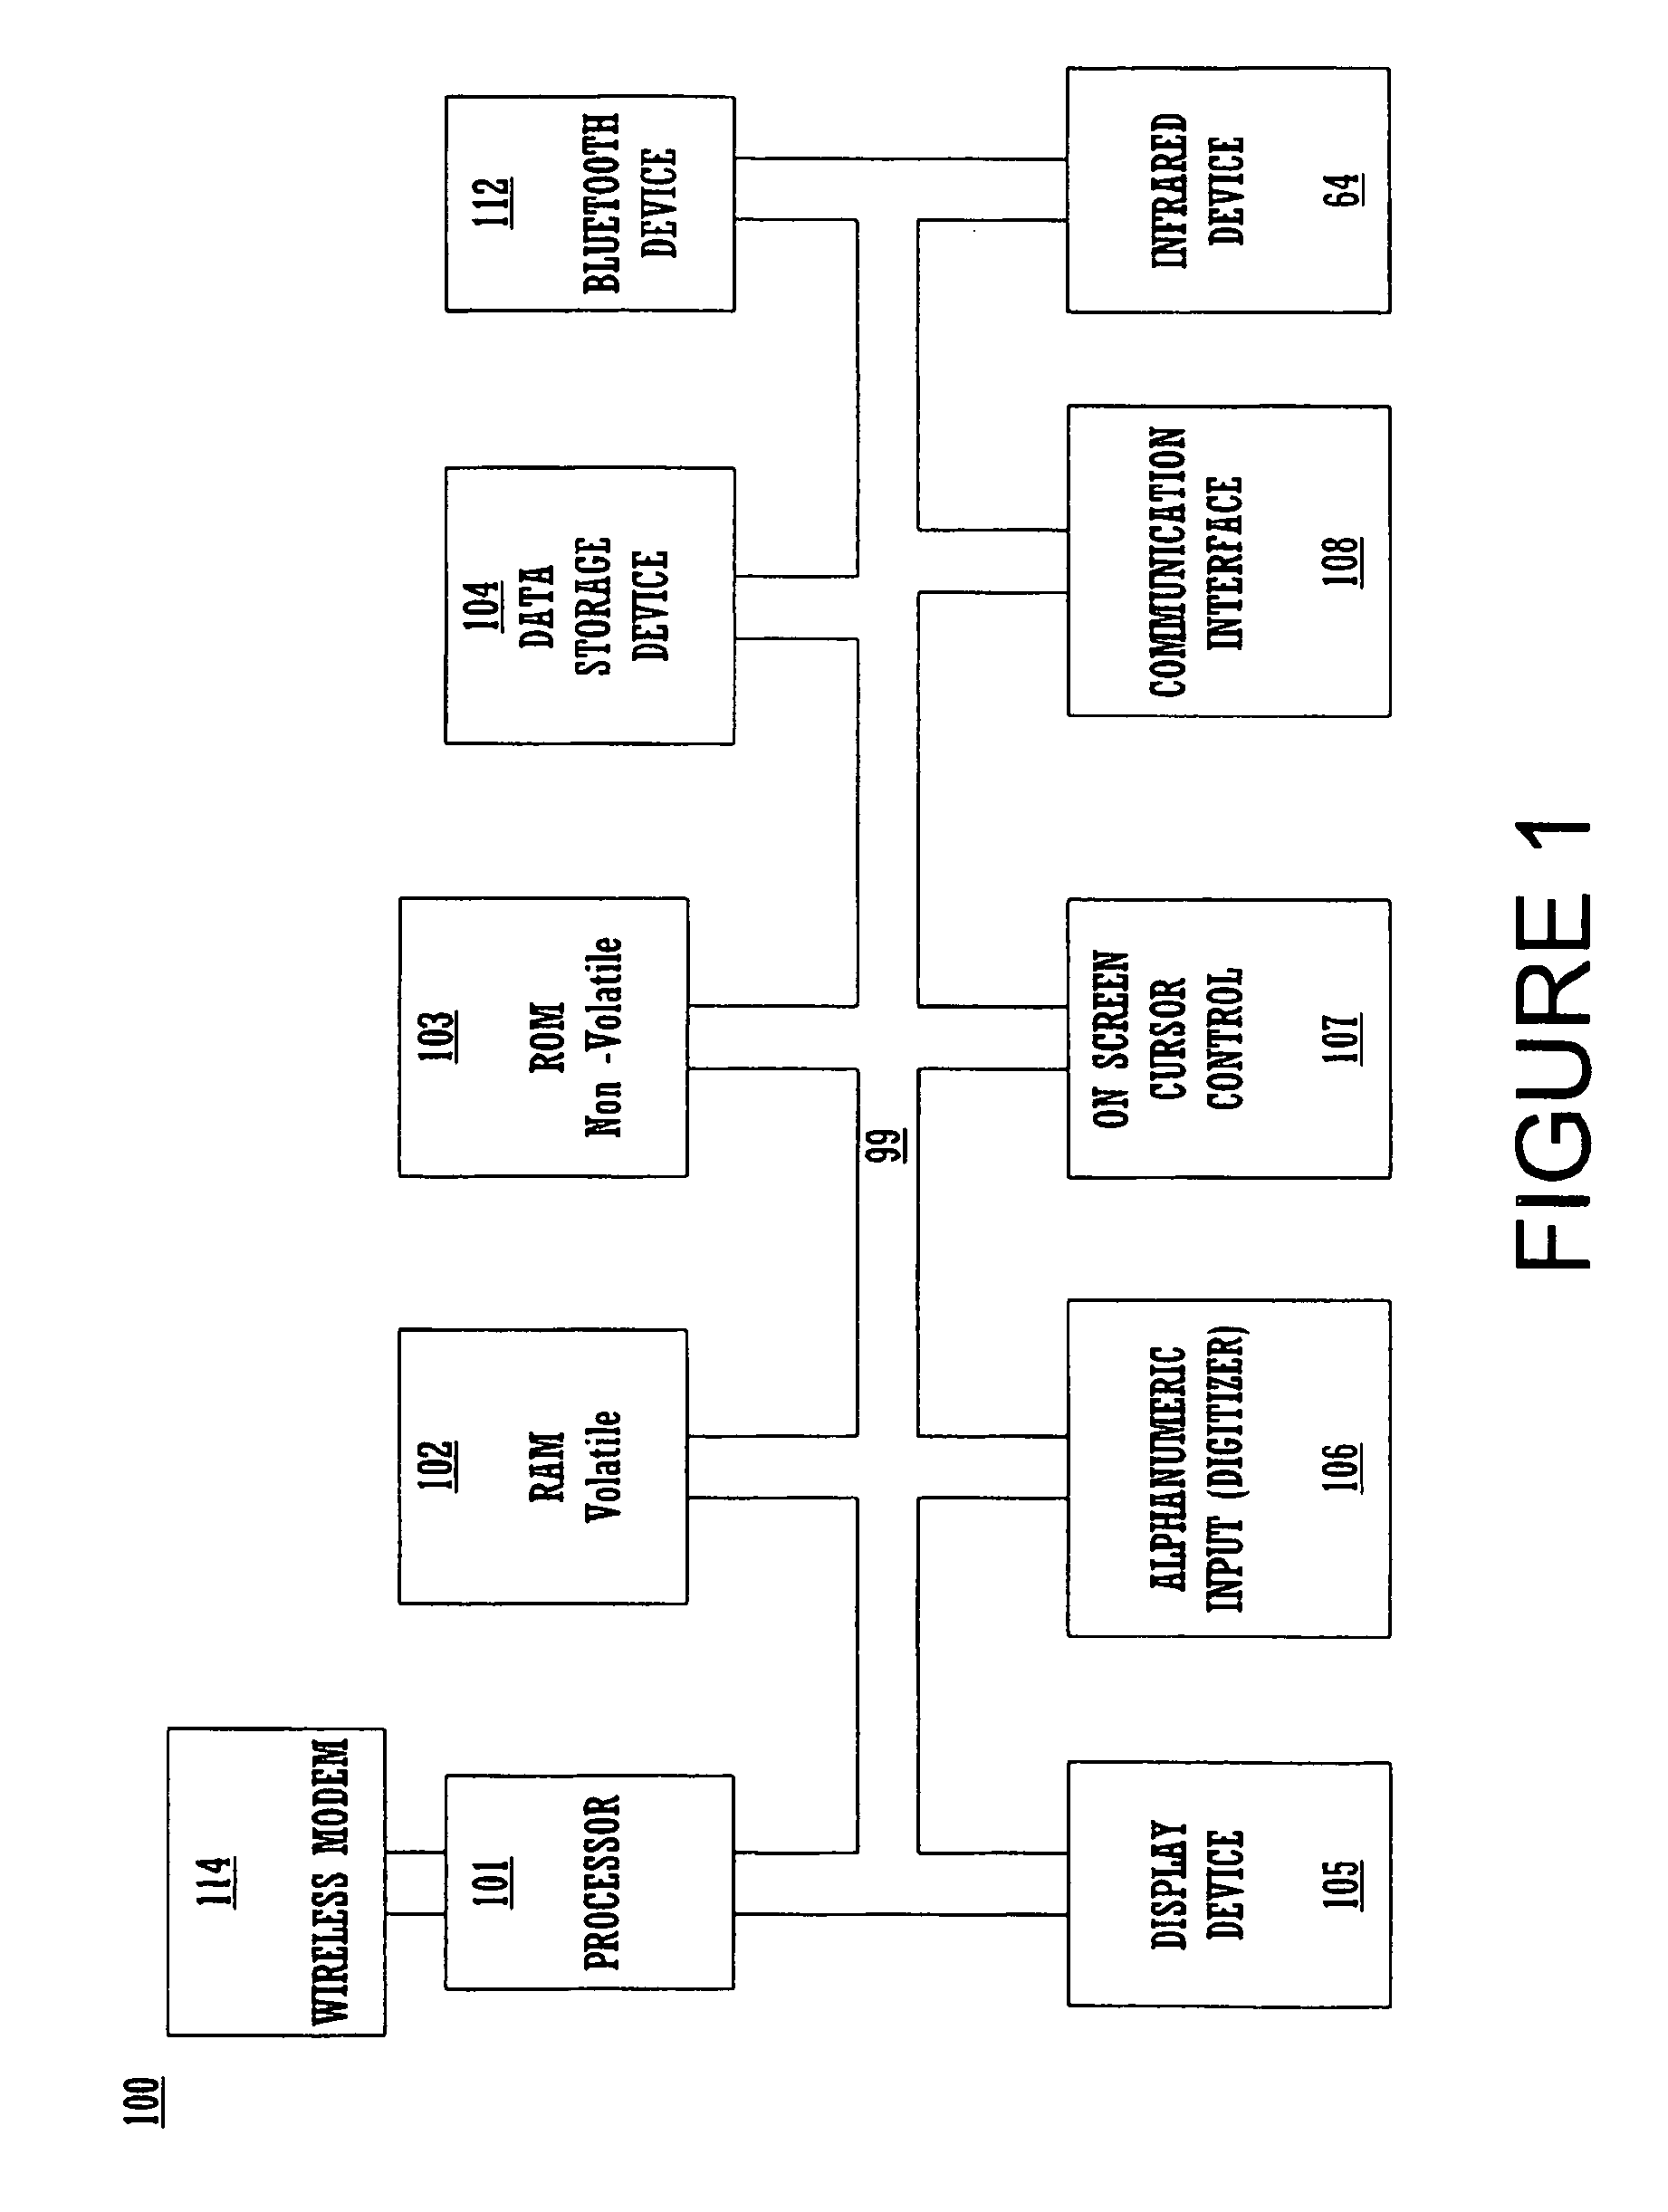 Method for waking a device in response to a wireless network activity